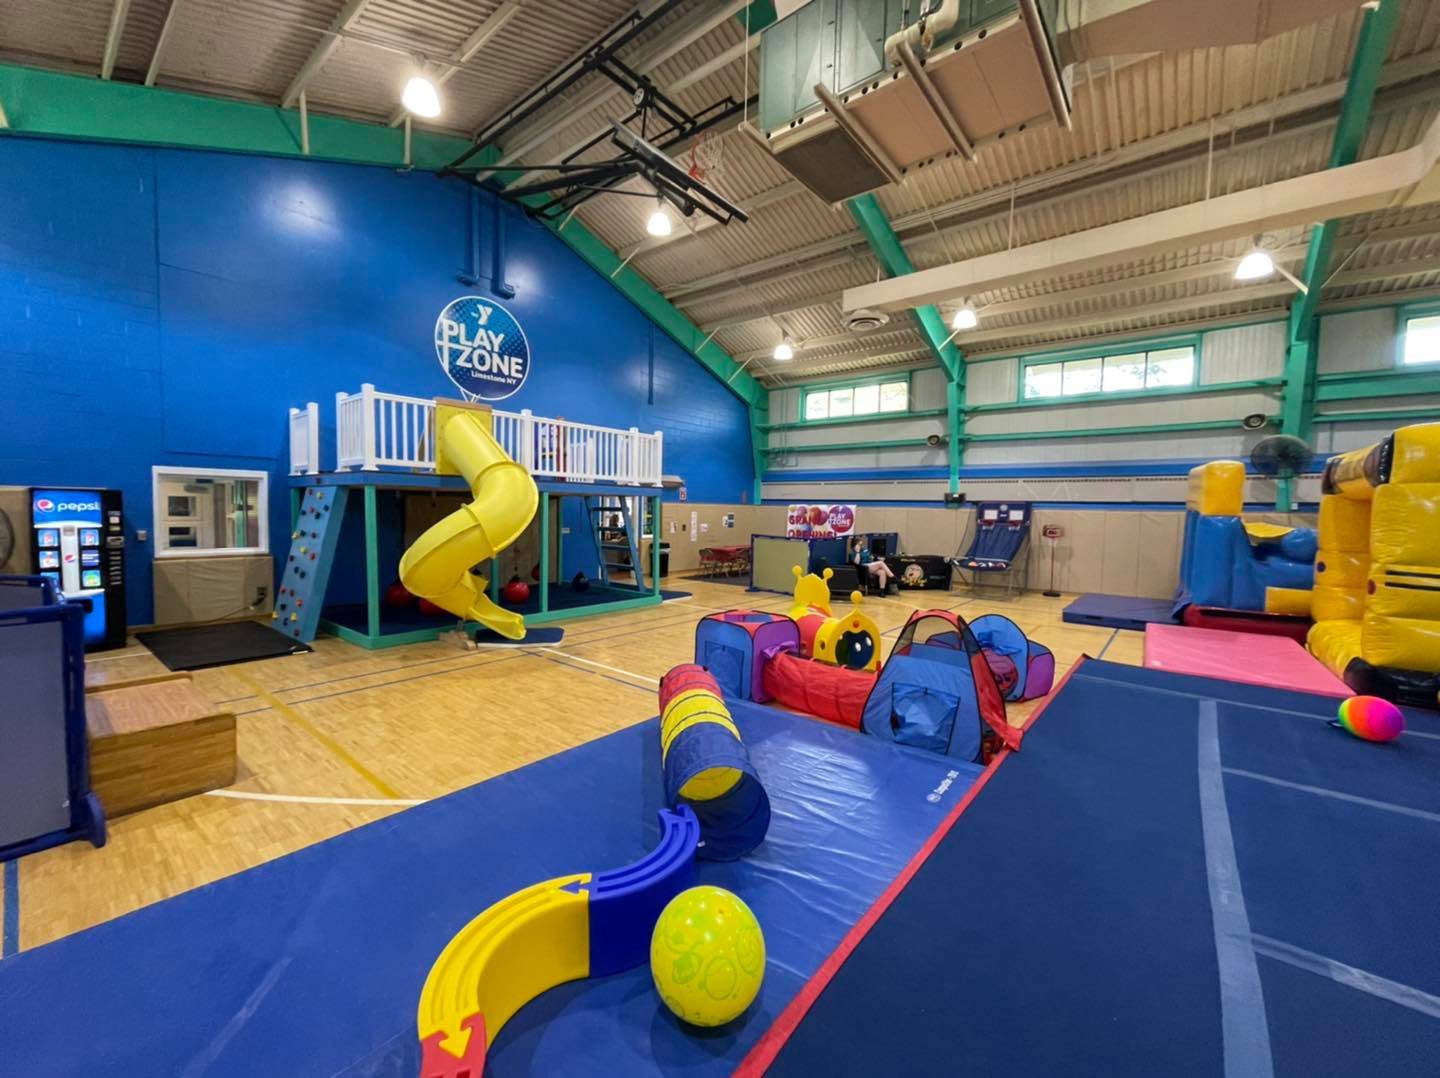 Photo shows indoor play area with mats, balls, a circular slide, and more